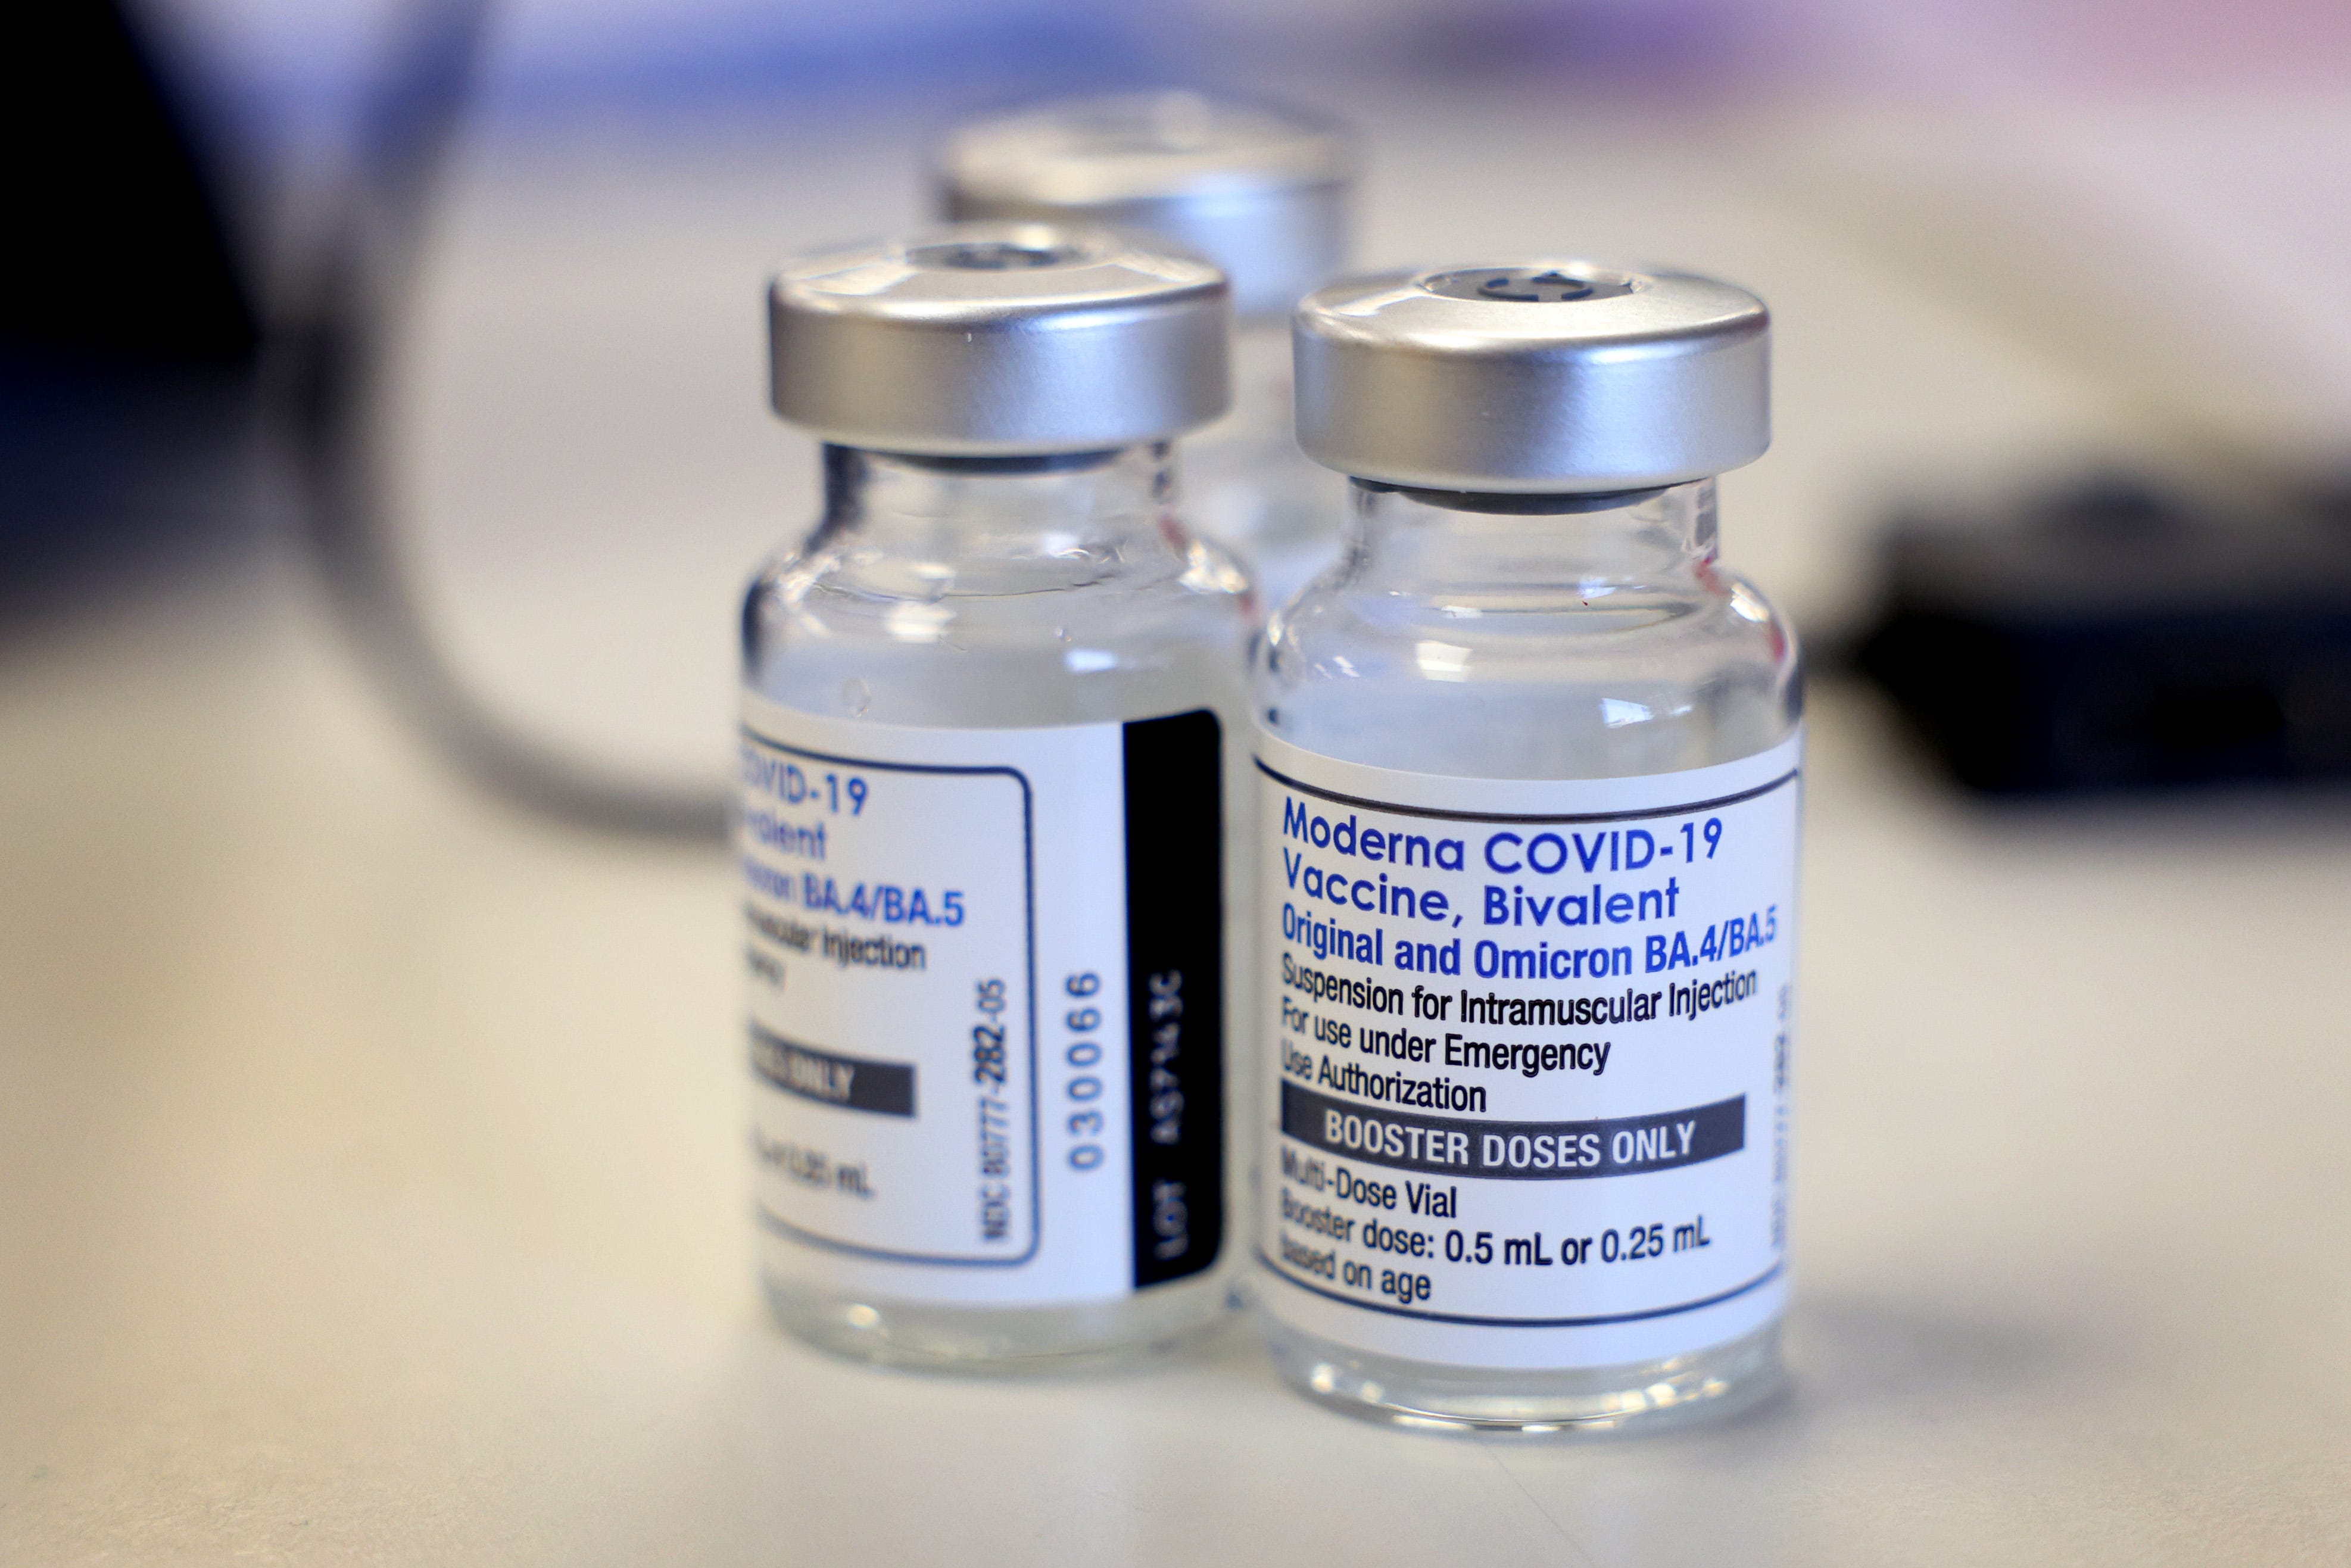 Utah plastic surgeon sold fake COVID vaccination cards, destroyed vaccines, DOJ claims